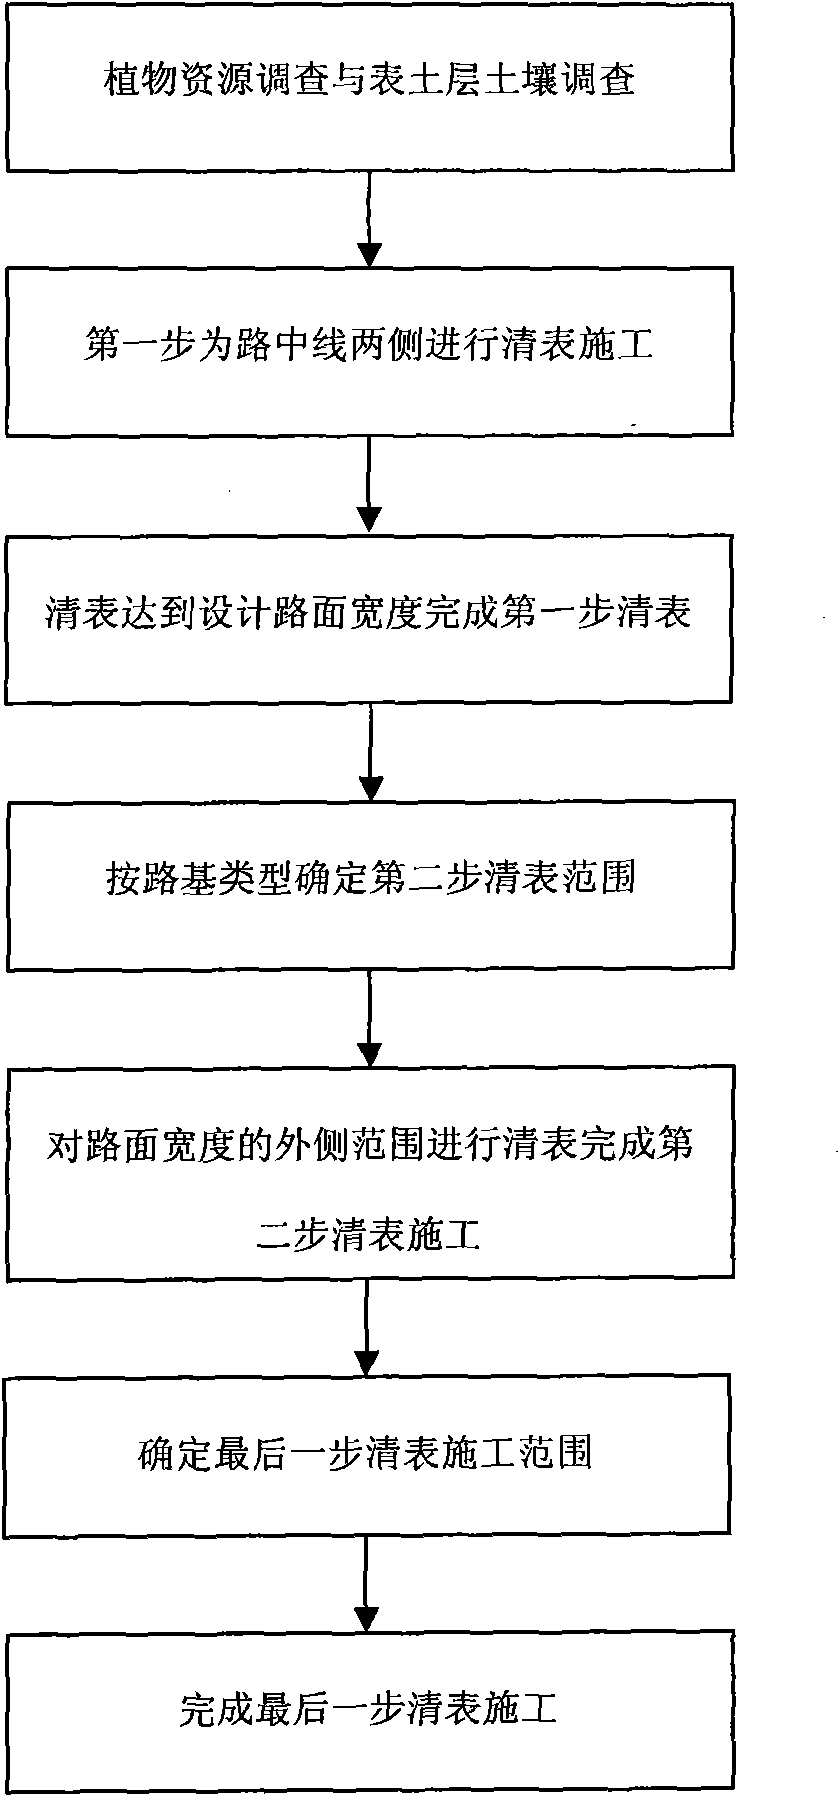 Stepwise construction method for clearing surface of highway subgrade